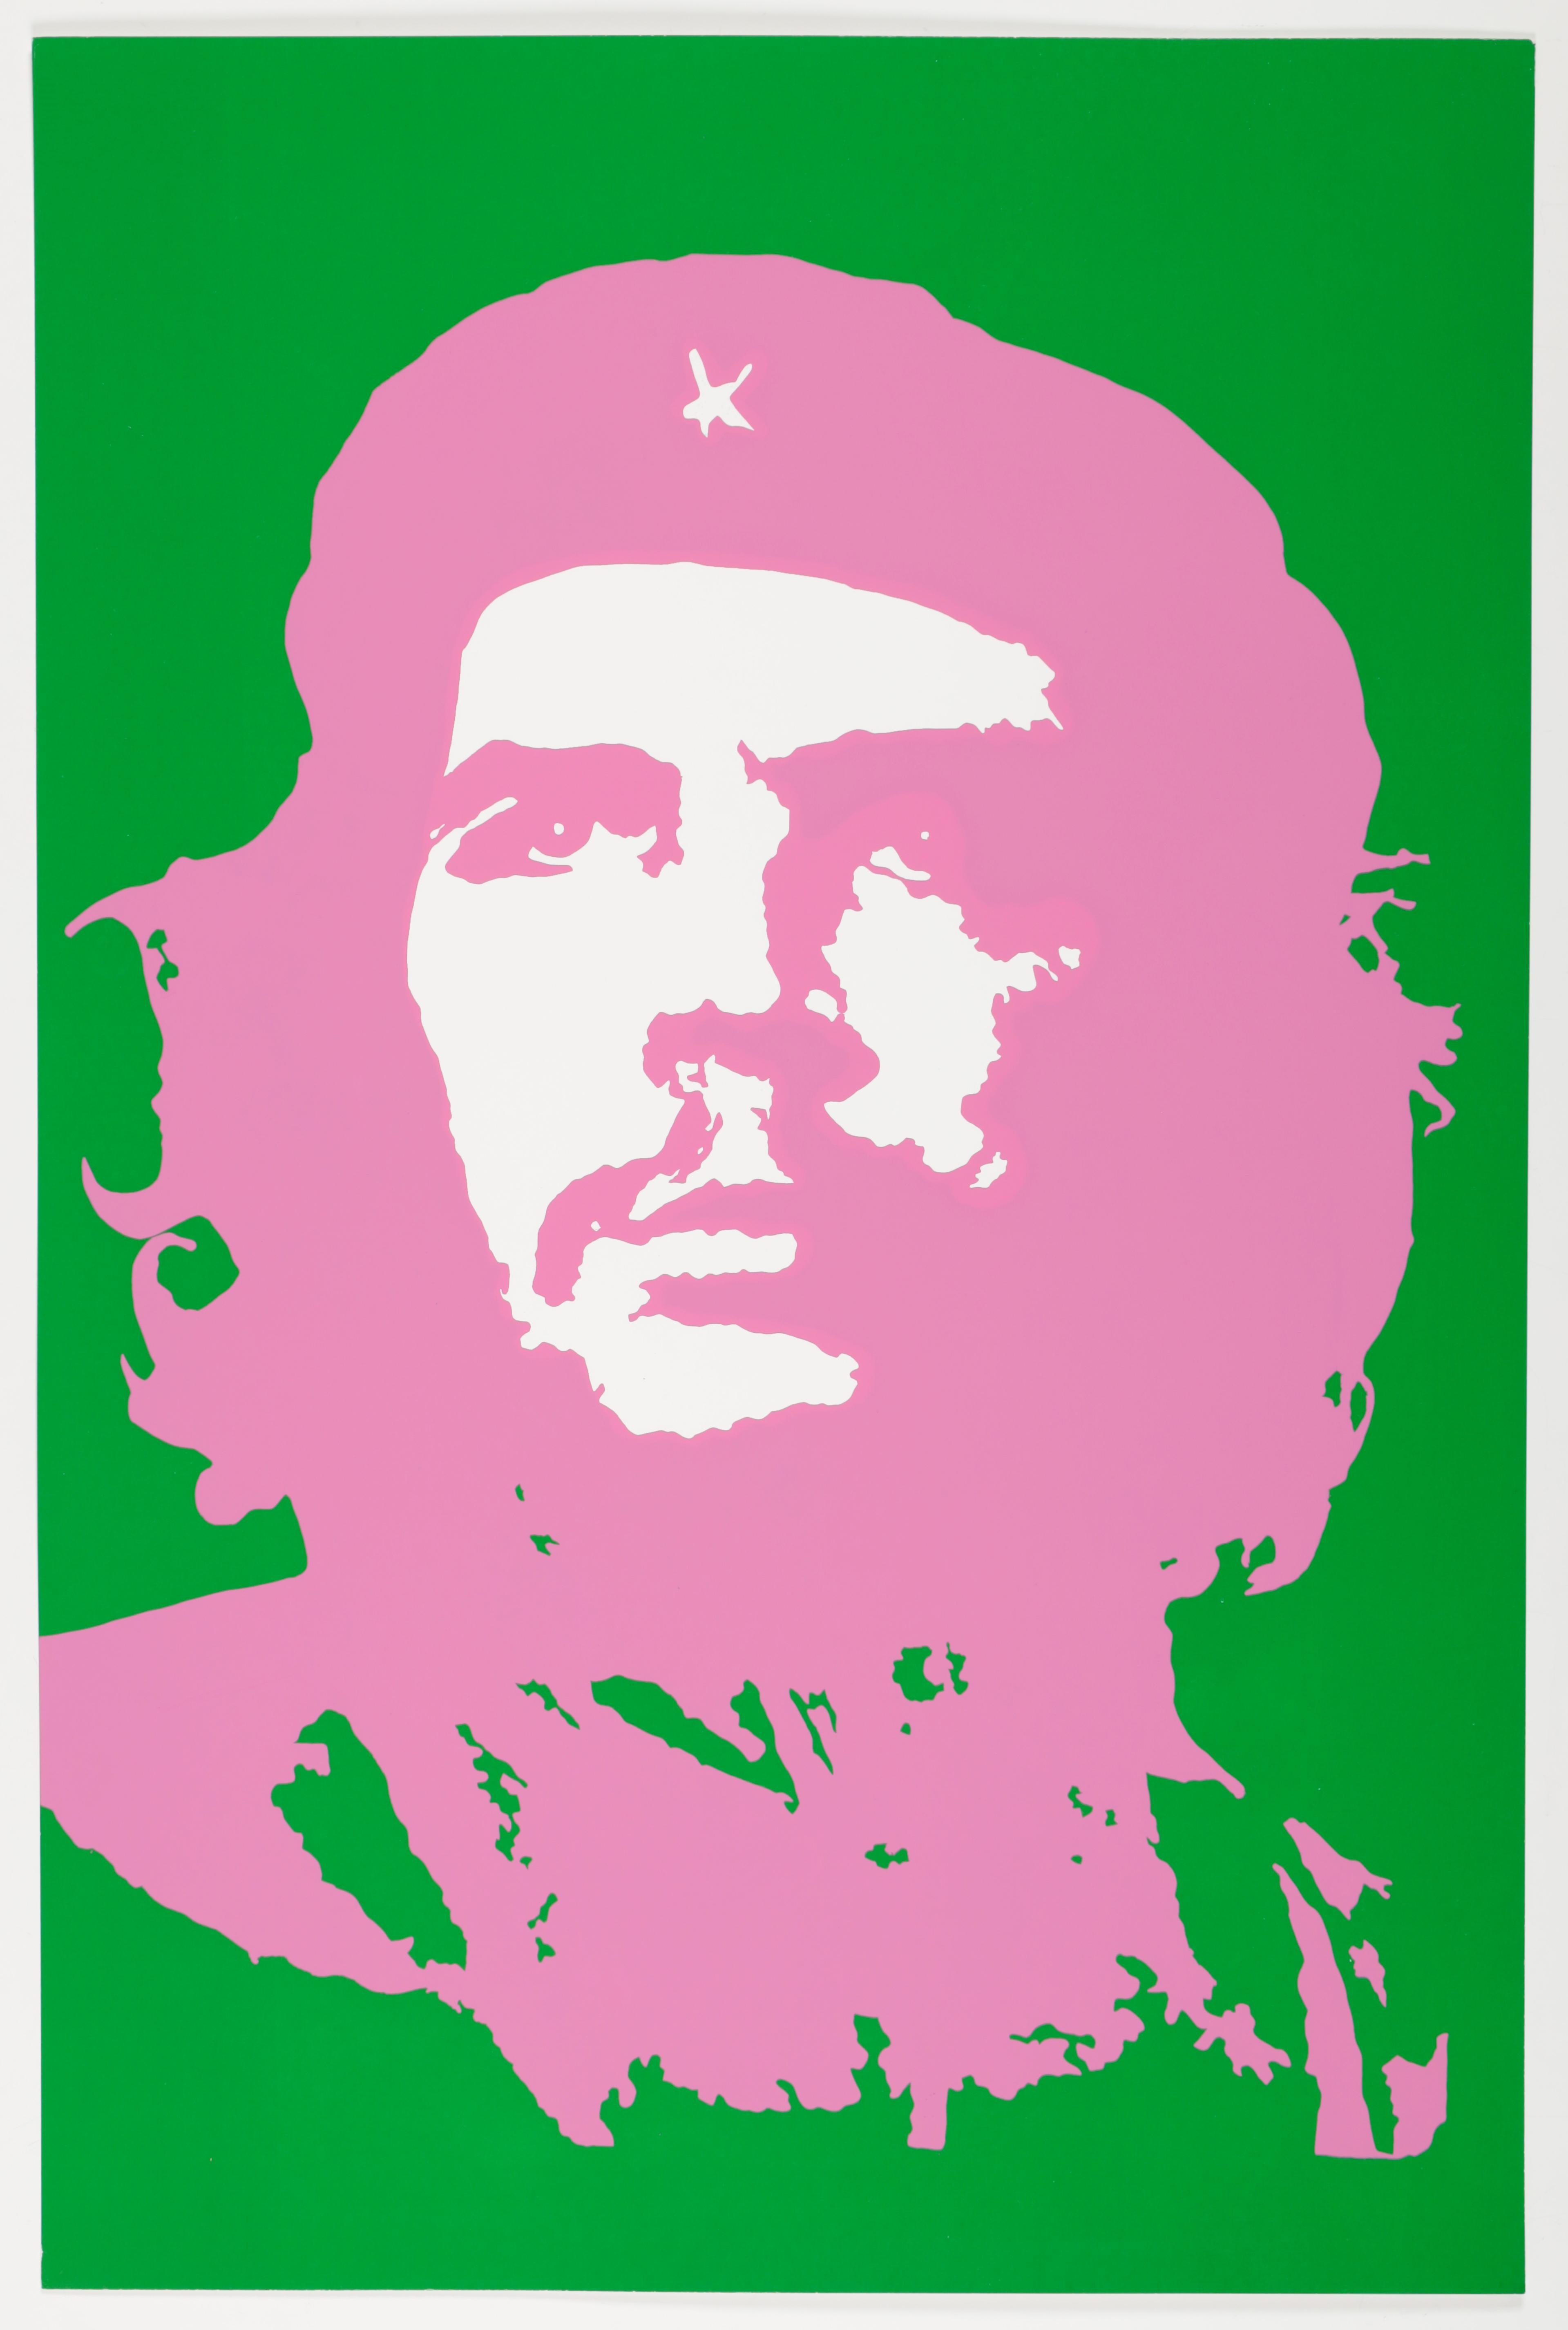 Artwork by Andy Warhol, Che Guevara, Made of color screen print on light cardboard